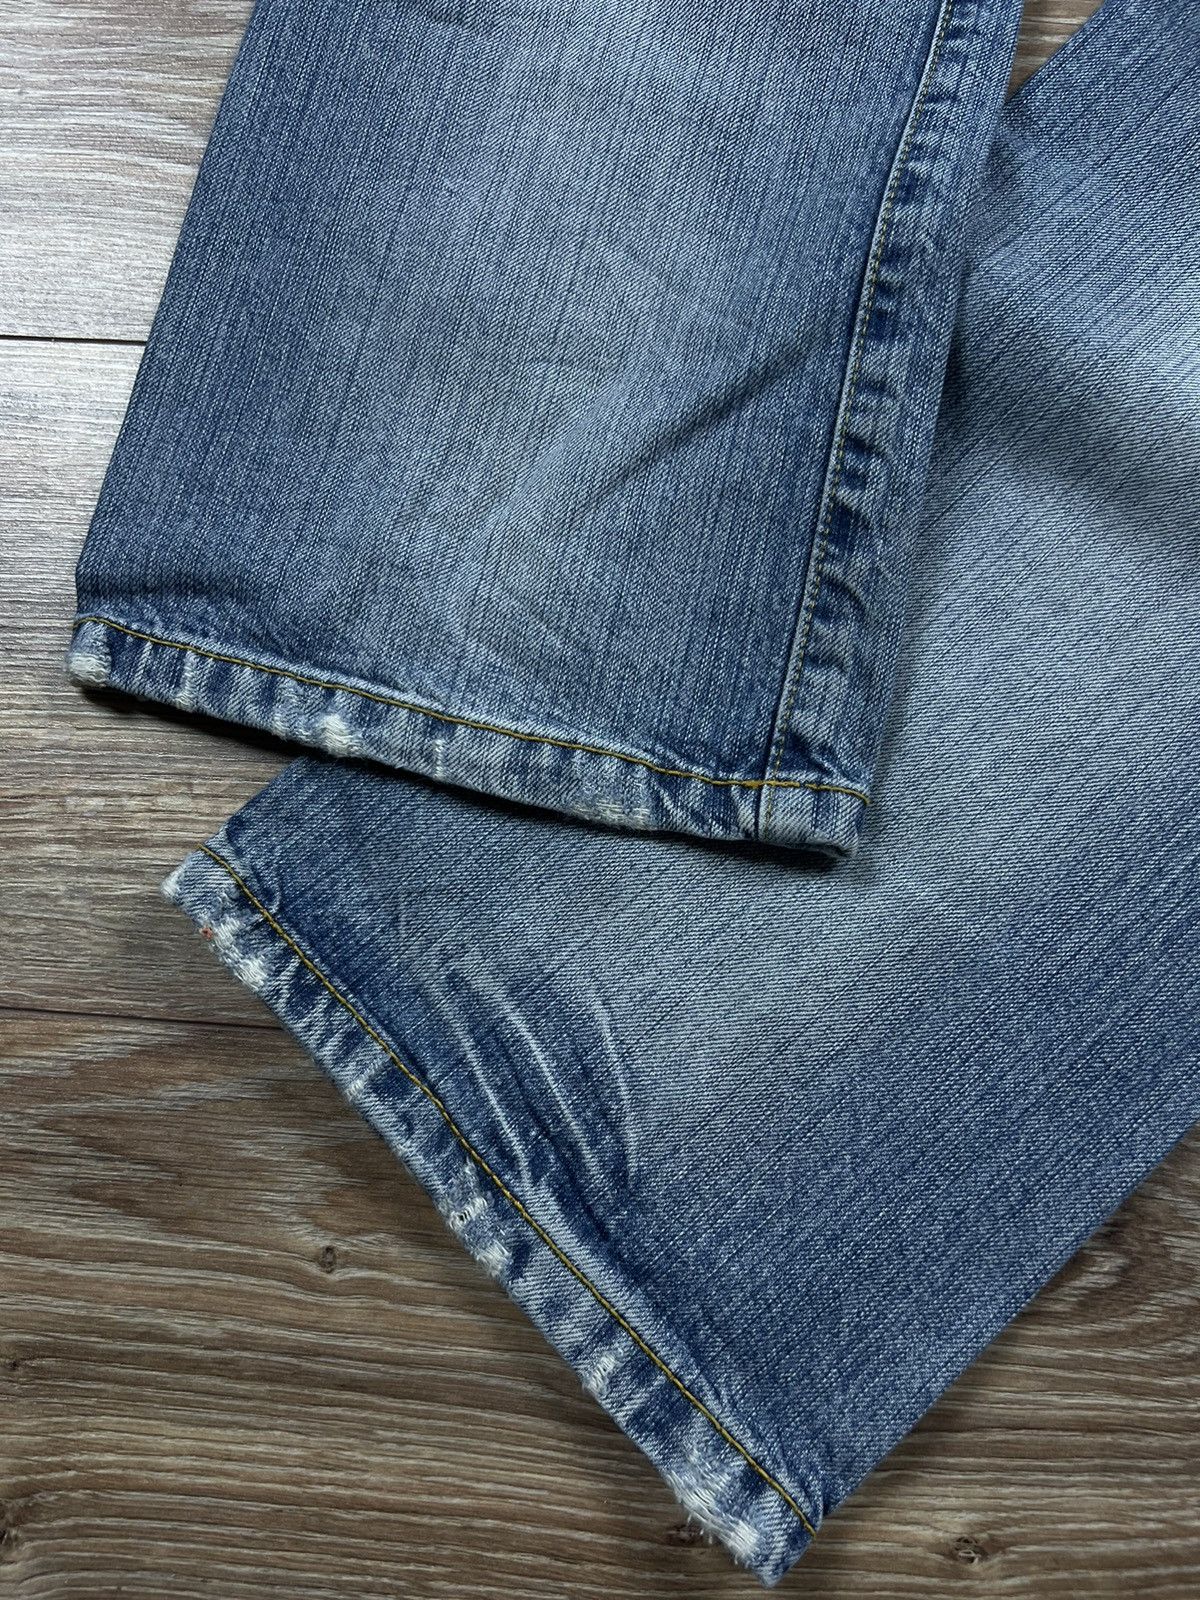 Vintage 💎 90’S G-STAR RAW VINTAGE AVANT GARDE WASHED STRAIGHT JEANS Size US 31 - 6 Thumbnail